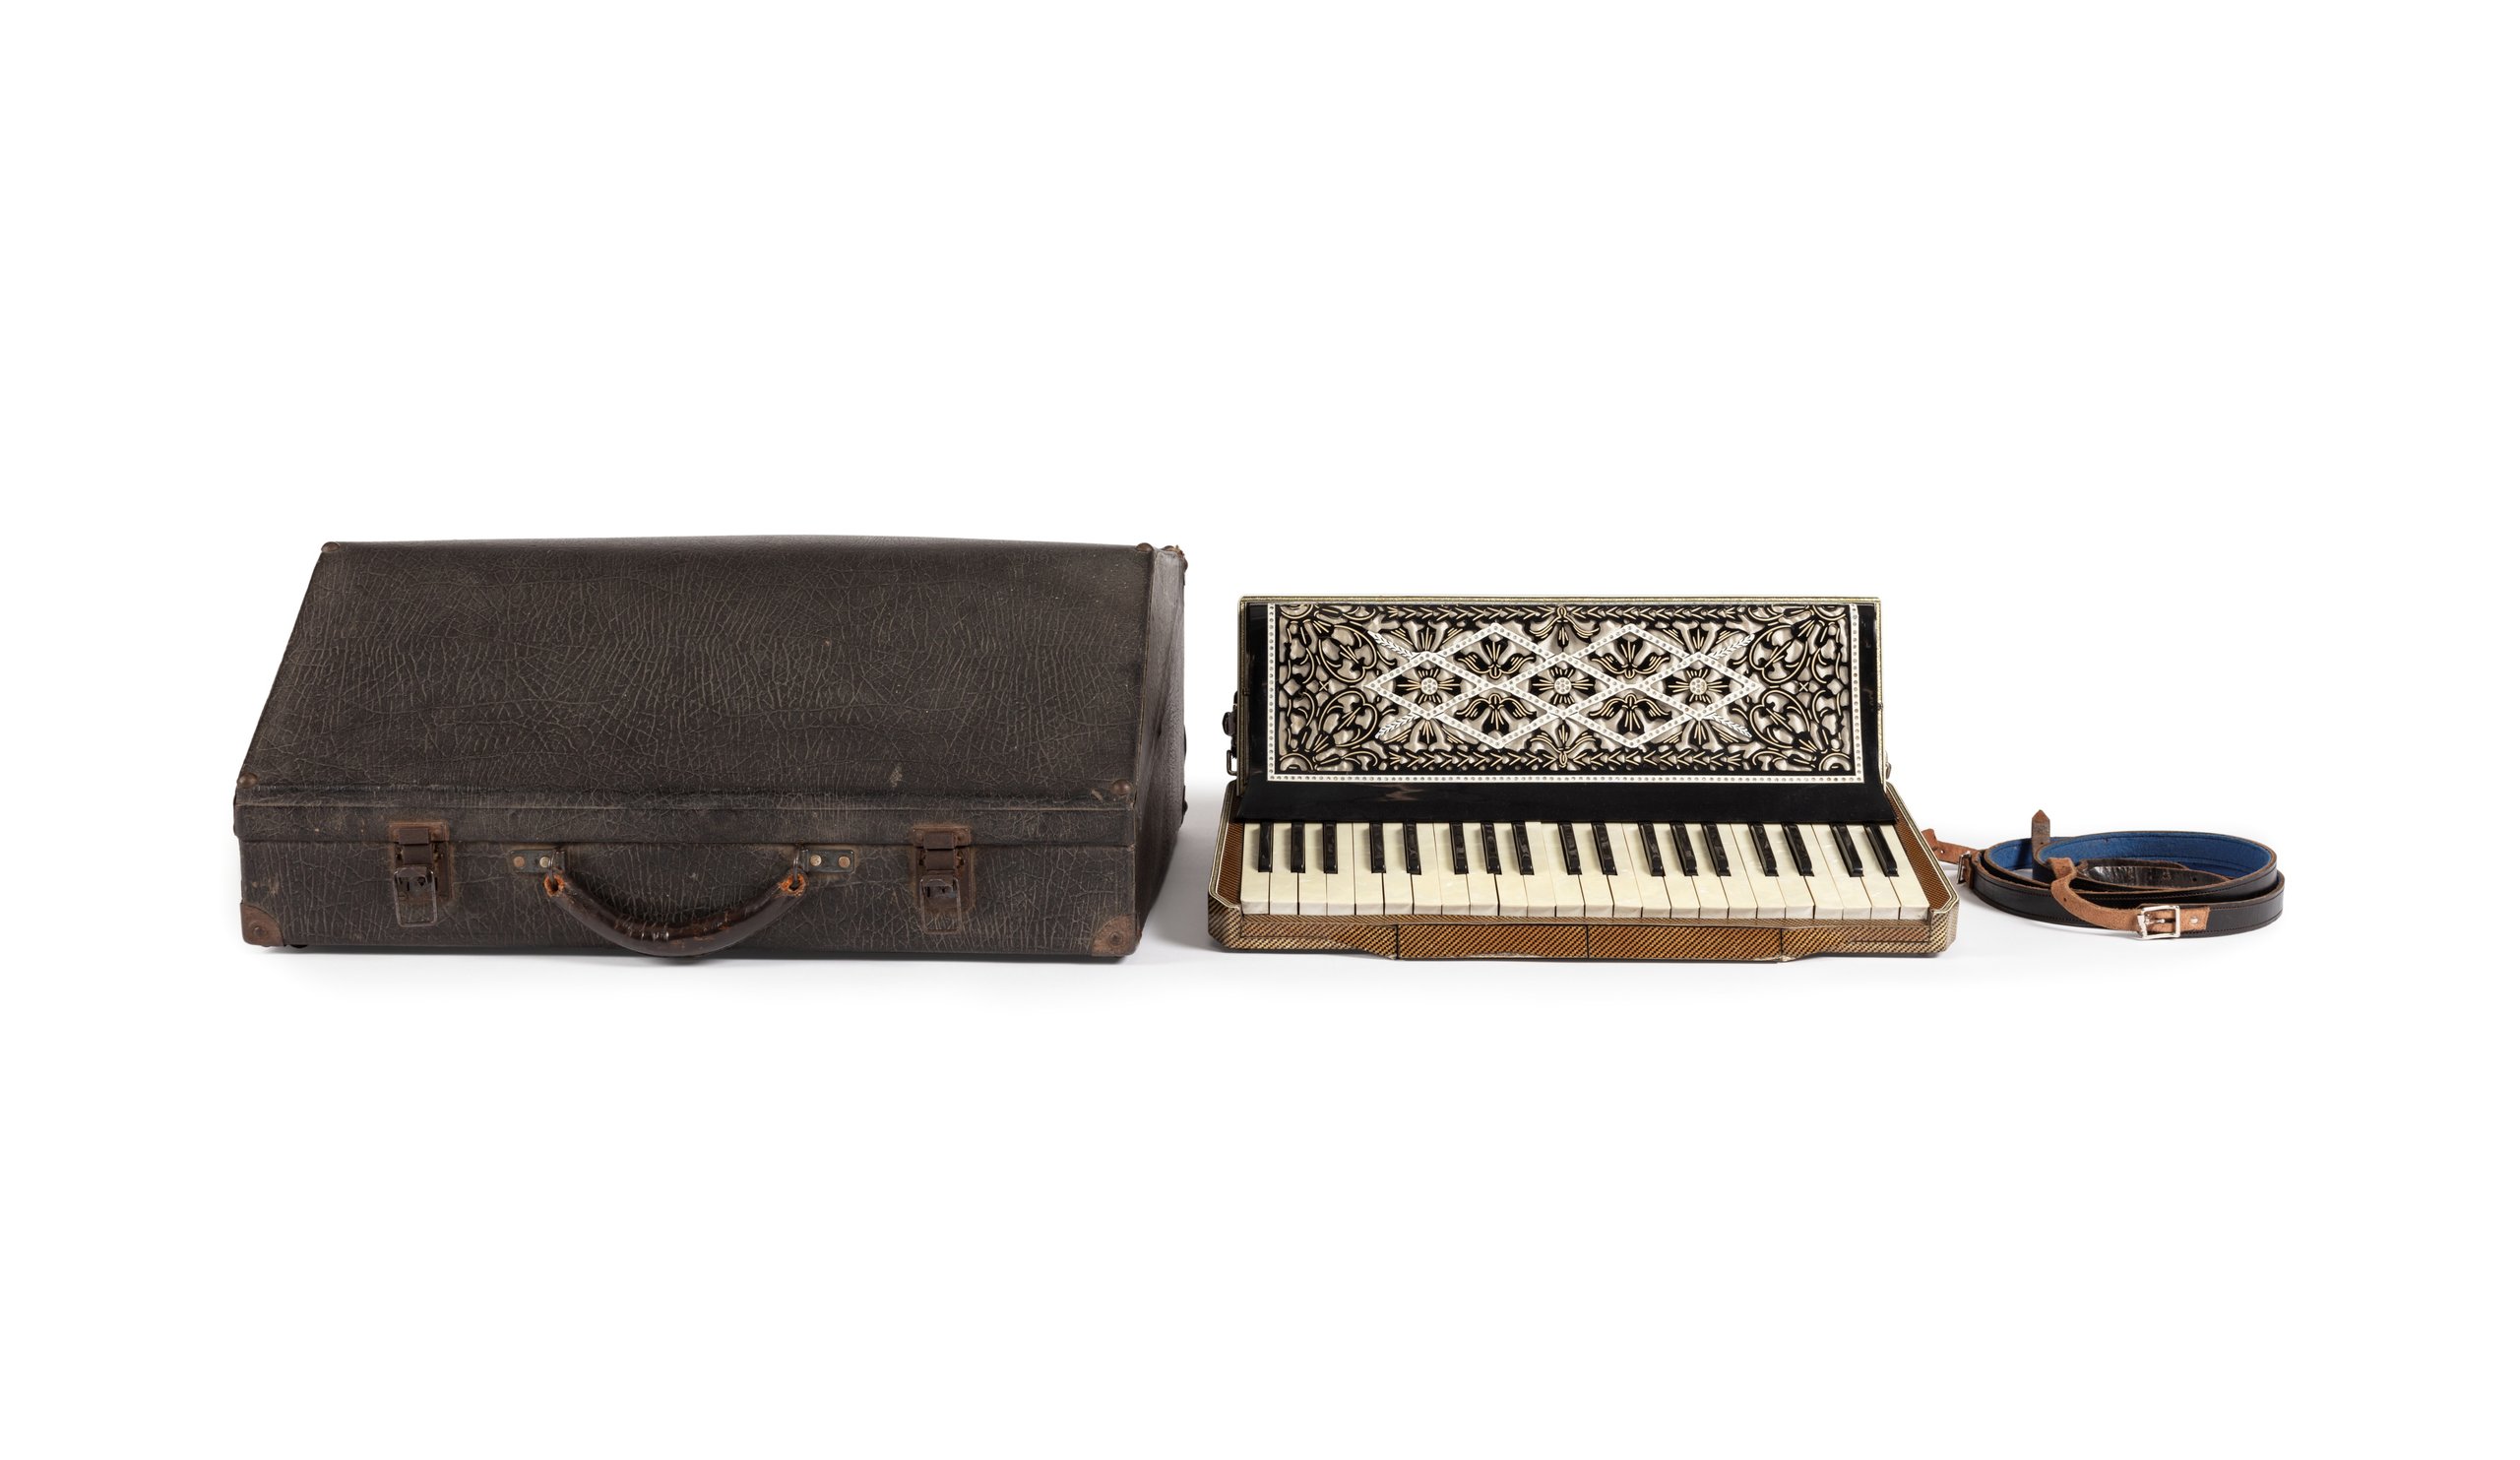 Piano accordion with case and strap made by Wurlitzer